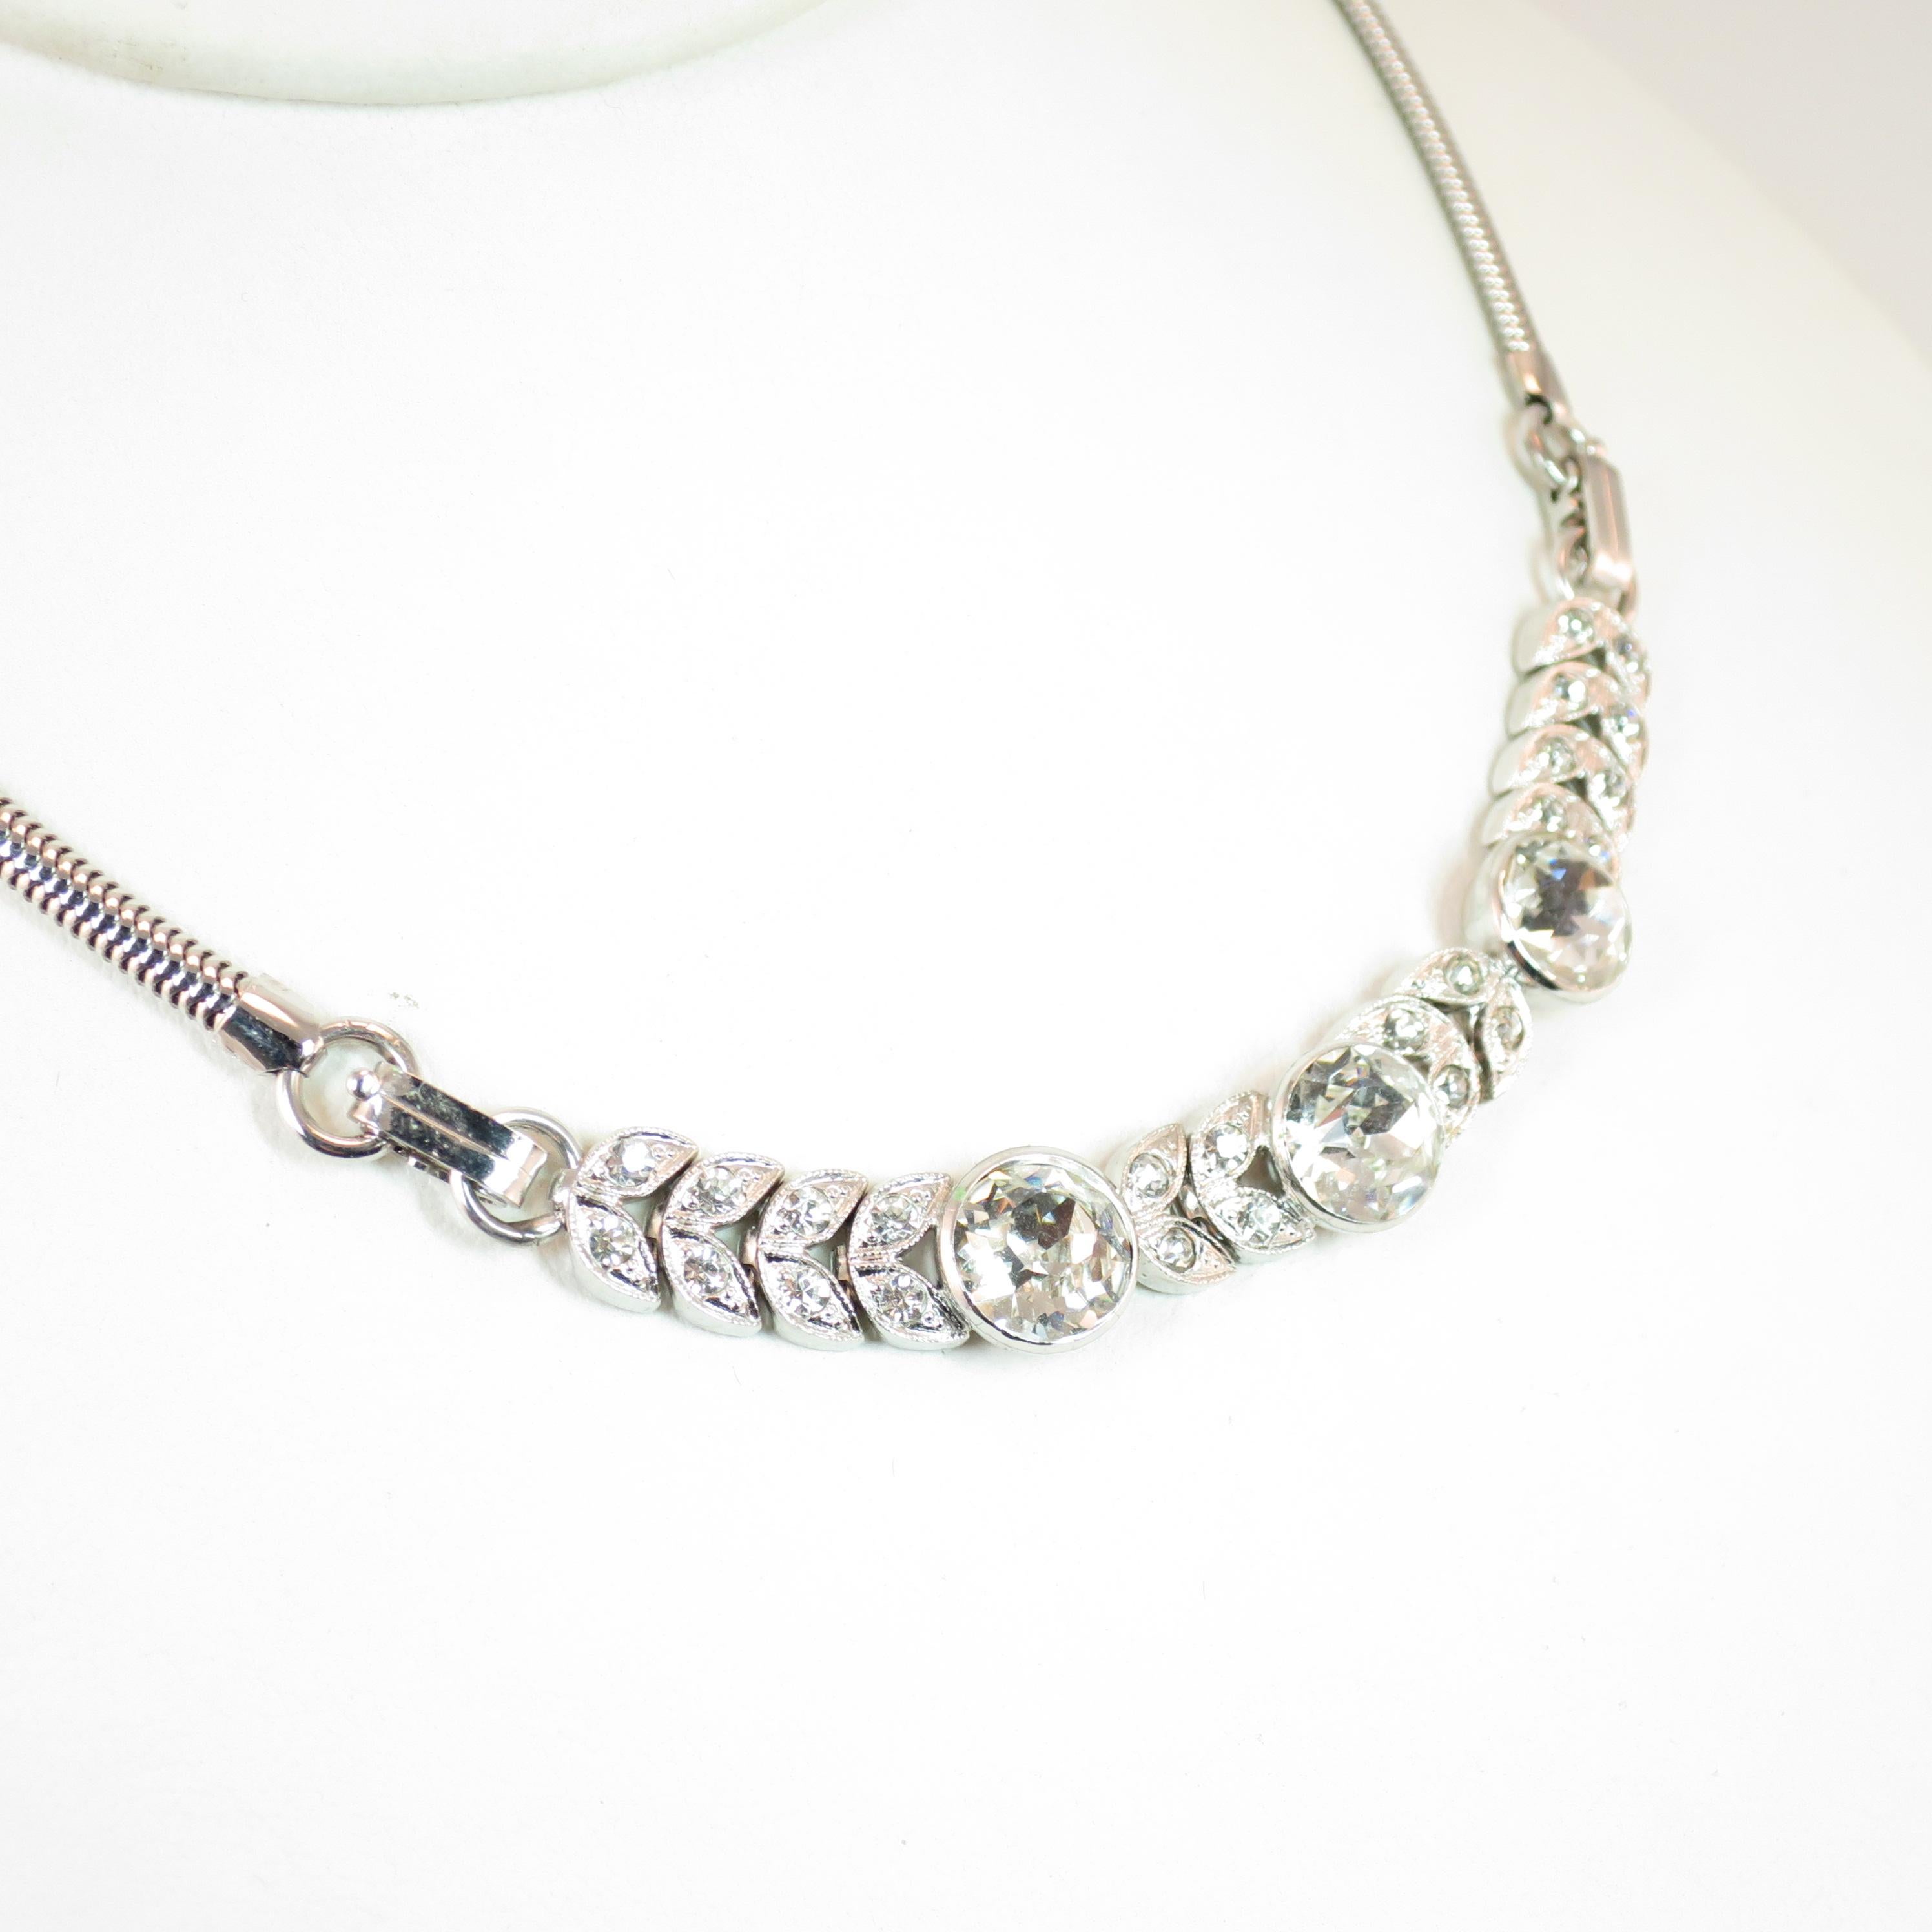 Offered here is an Engel Bros. Art Deco rhodium-plated sterling silver necklace from the 1930s. This uniquely designed necklace presents a centerpiece of large intricately faceted crystals in bezeled cup settings flanked by pavé-set small stones in